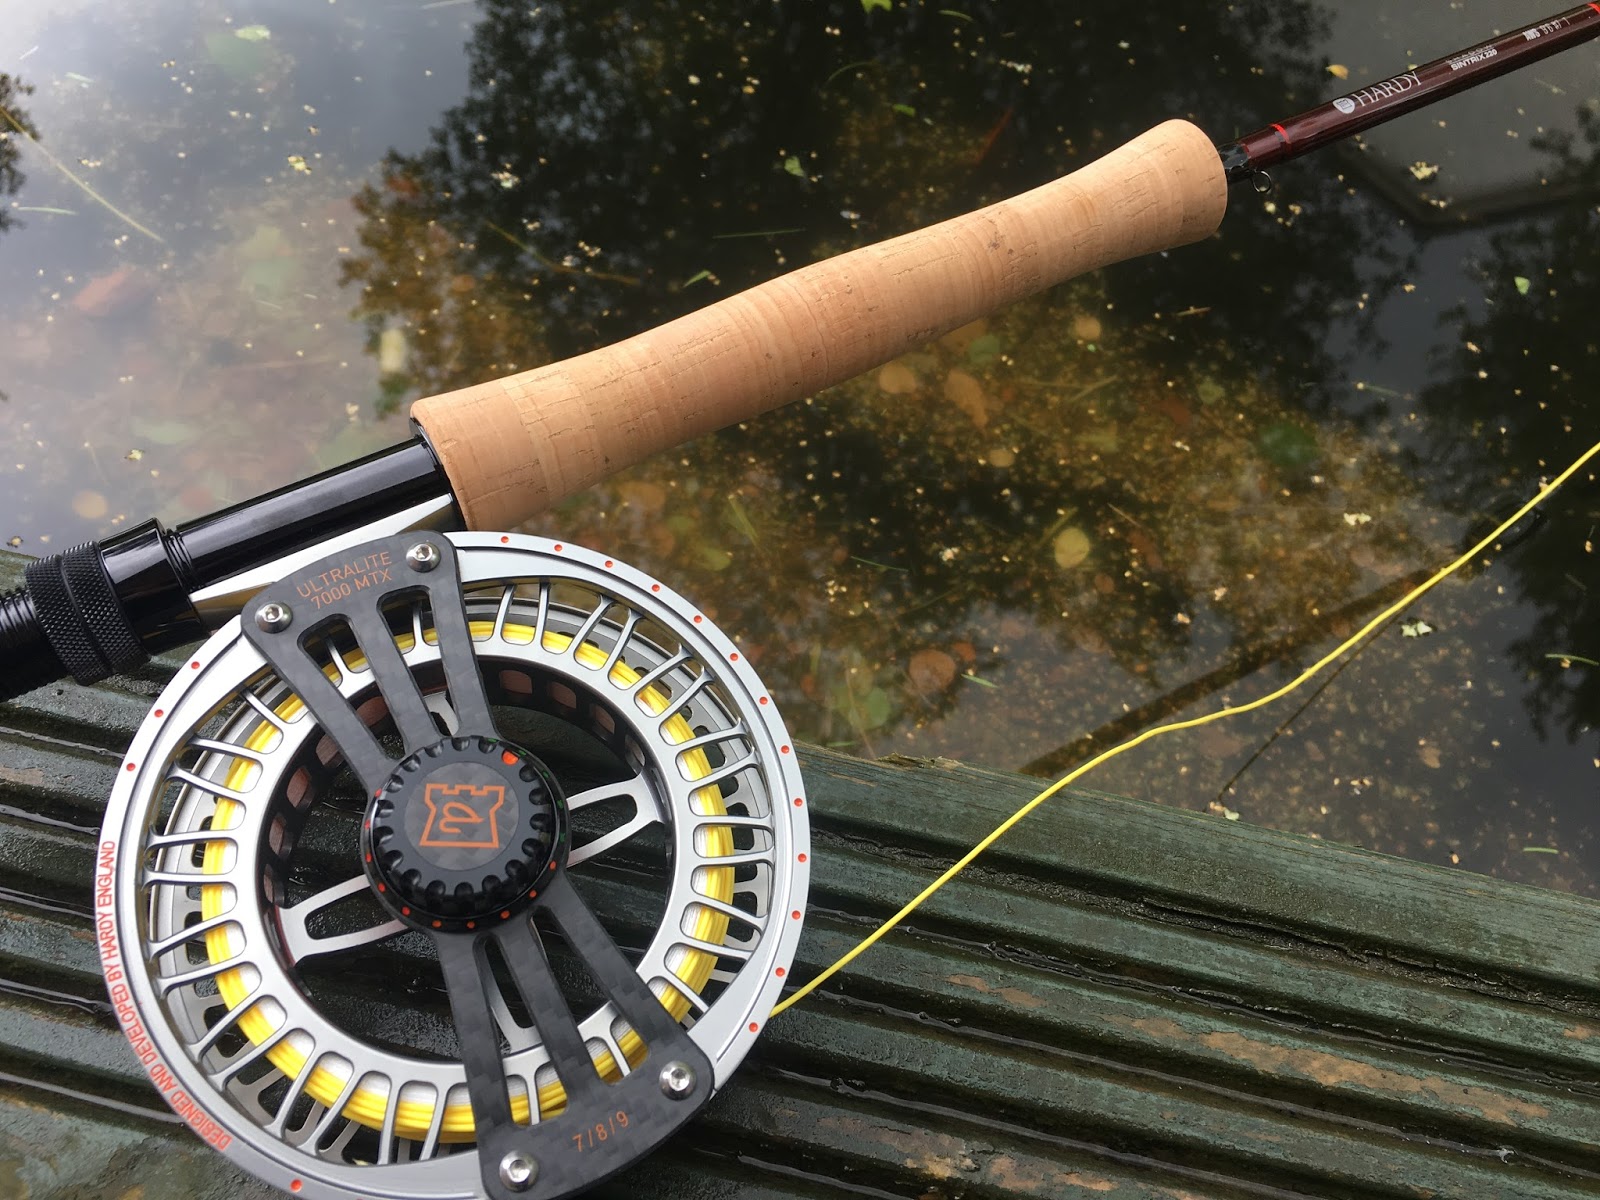 New Hardy Fly Fishing Gear for 2018 - Special Preview!